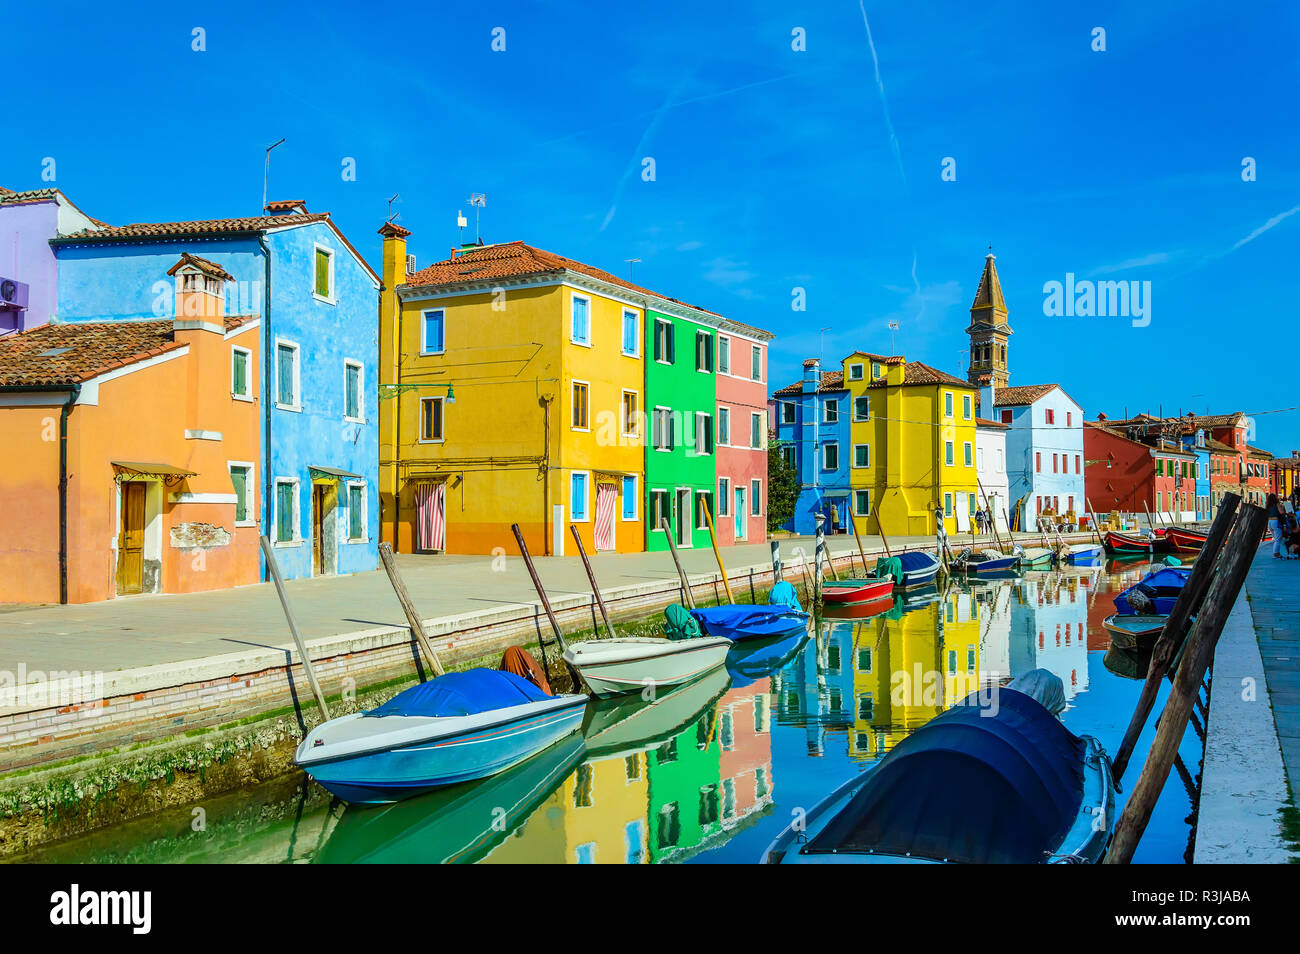 Colorful houses near canal on Burano island, Venice, Italy. Burano is famous for its lace work and brightly painted homes. Leaning campanile of San Ma Stock Photo